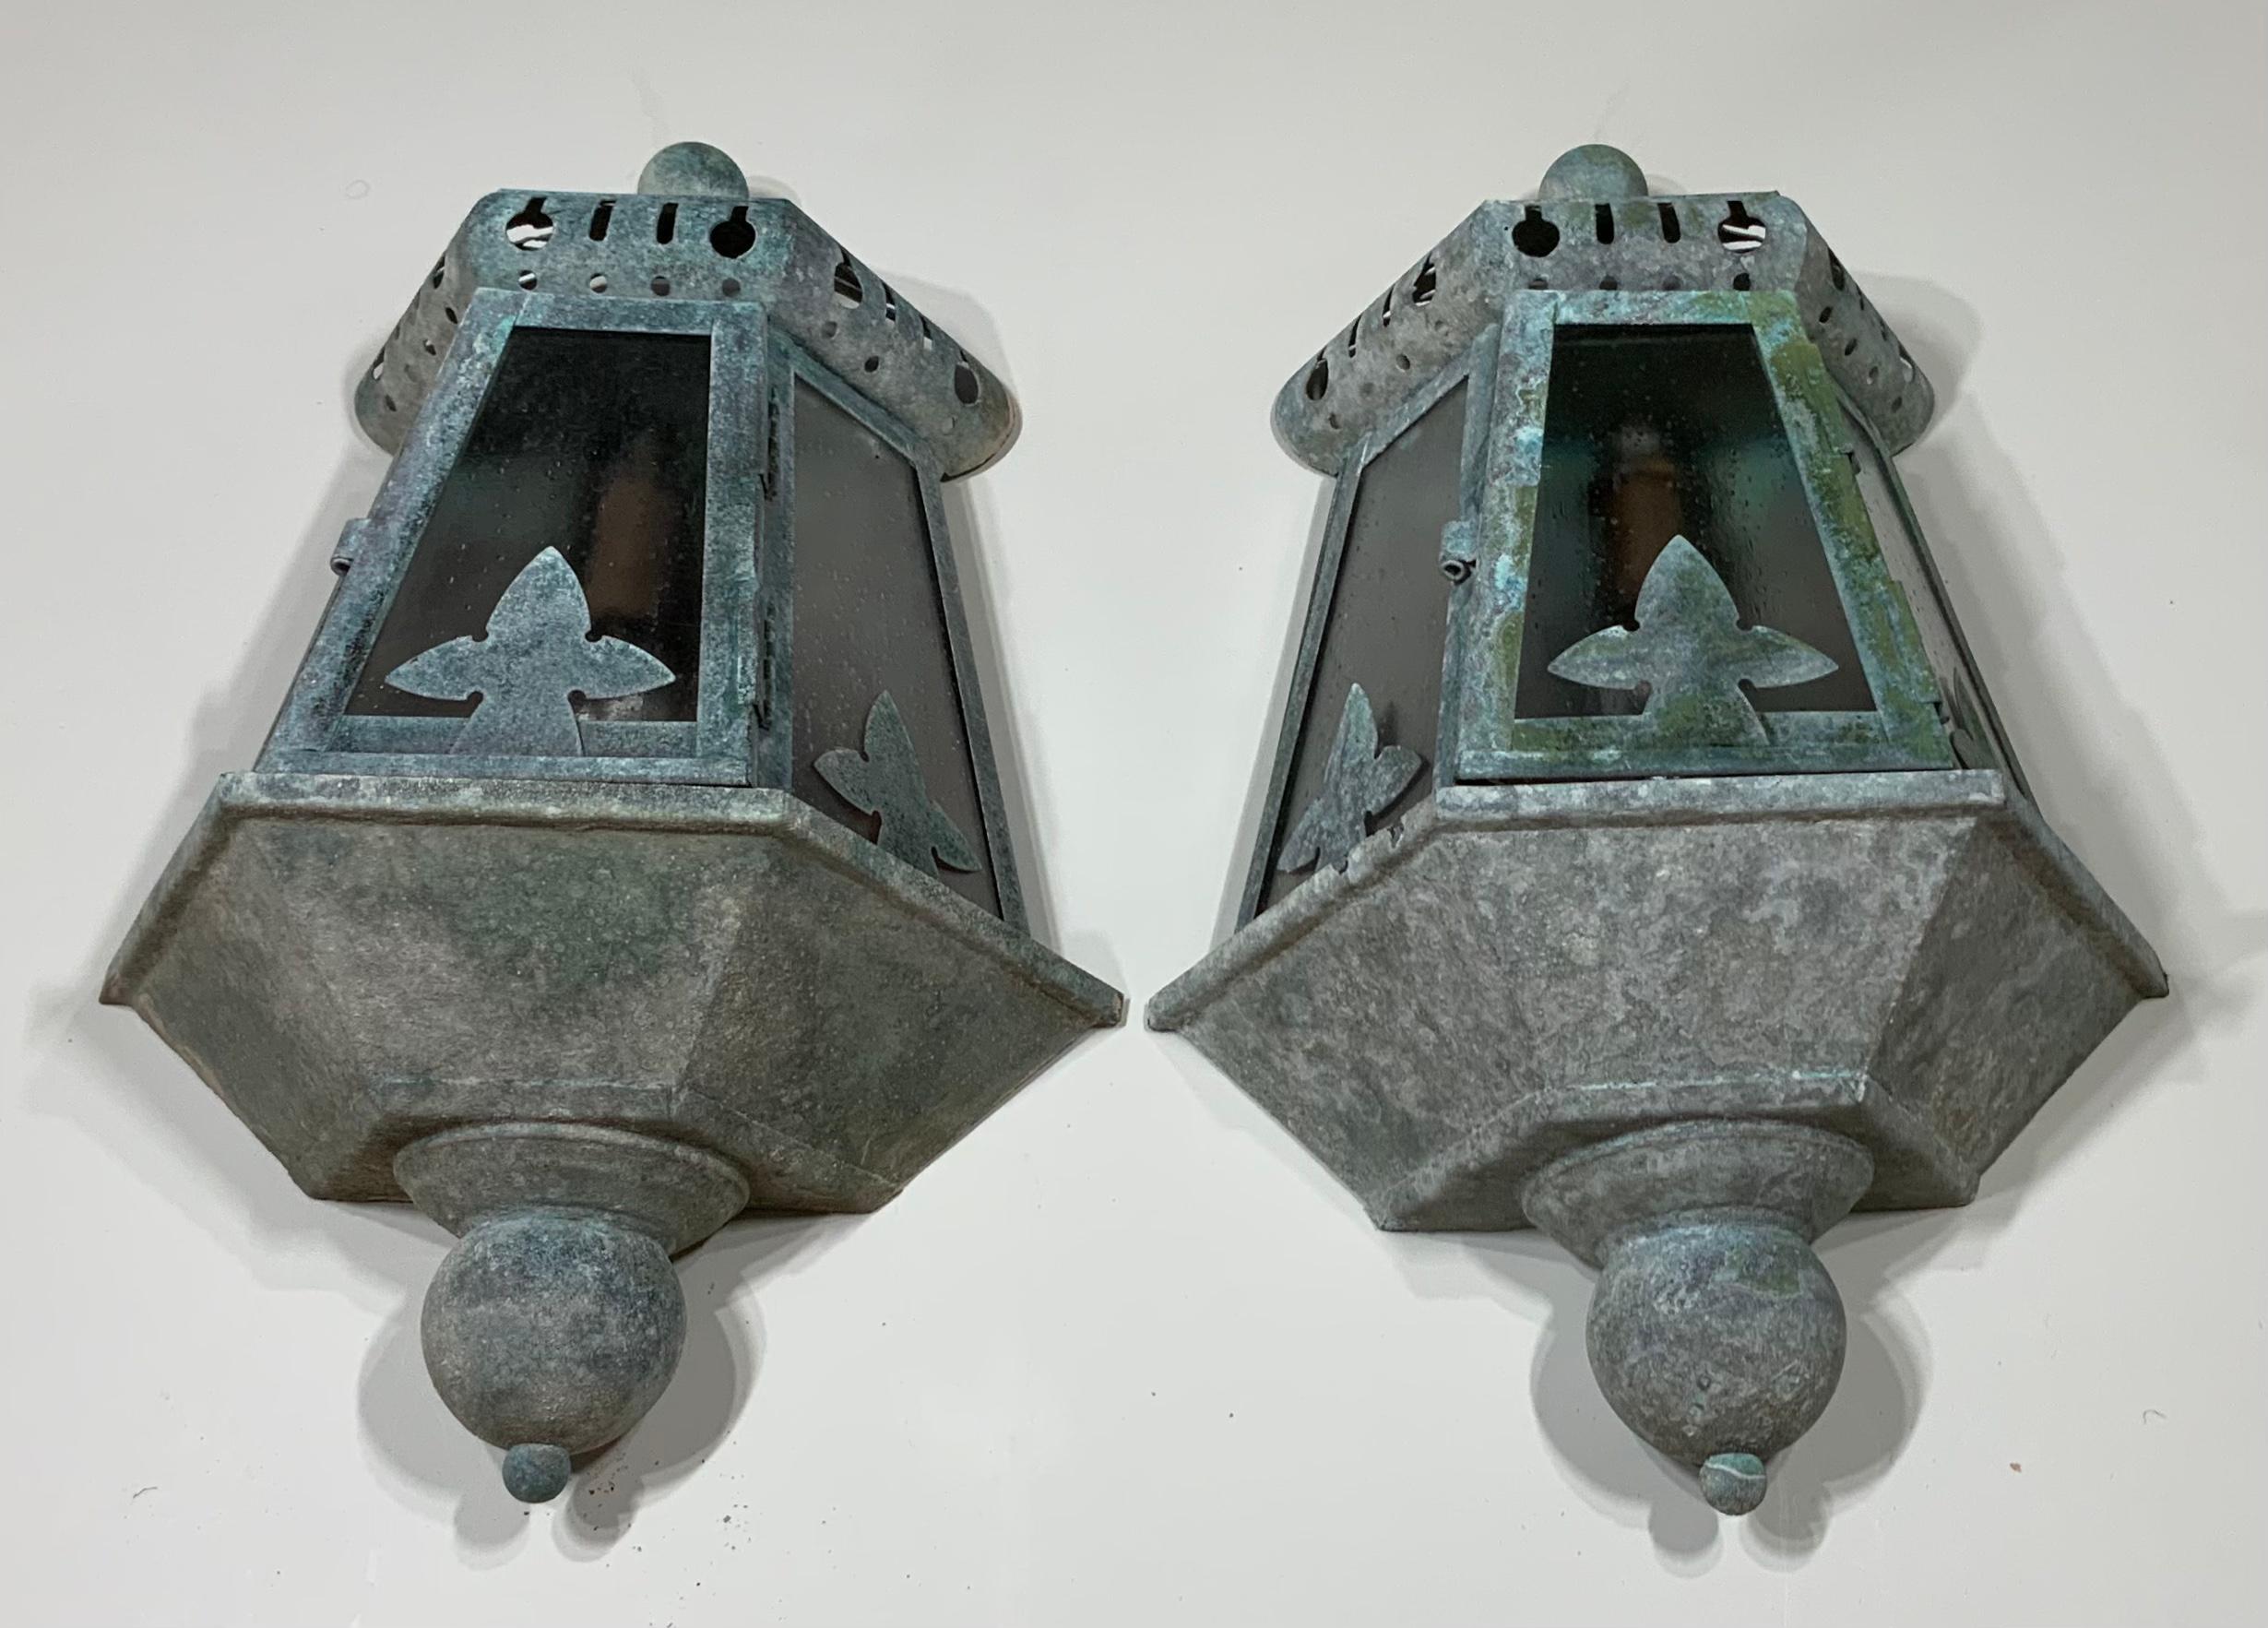 Hand-Crafted Pair of Vintage Wall Lantern